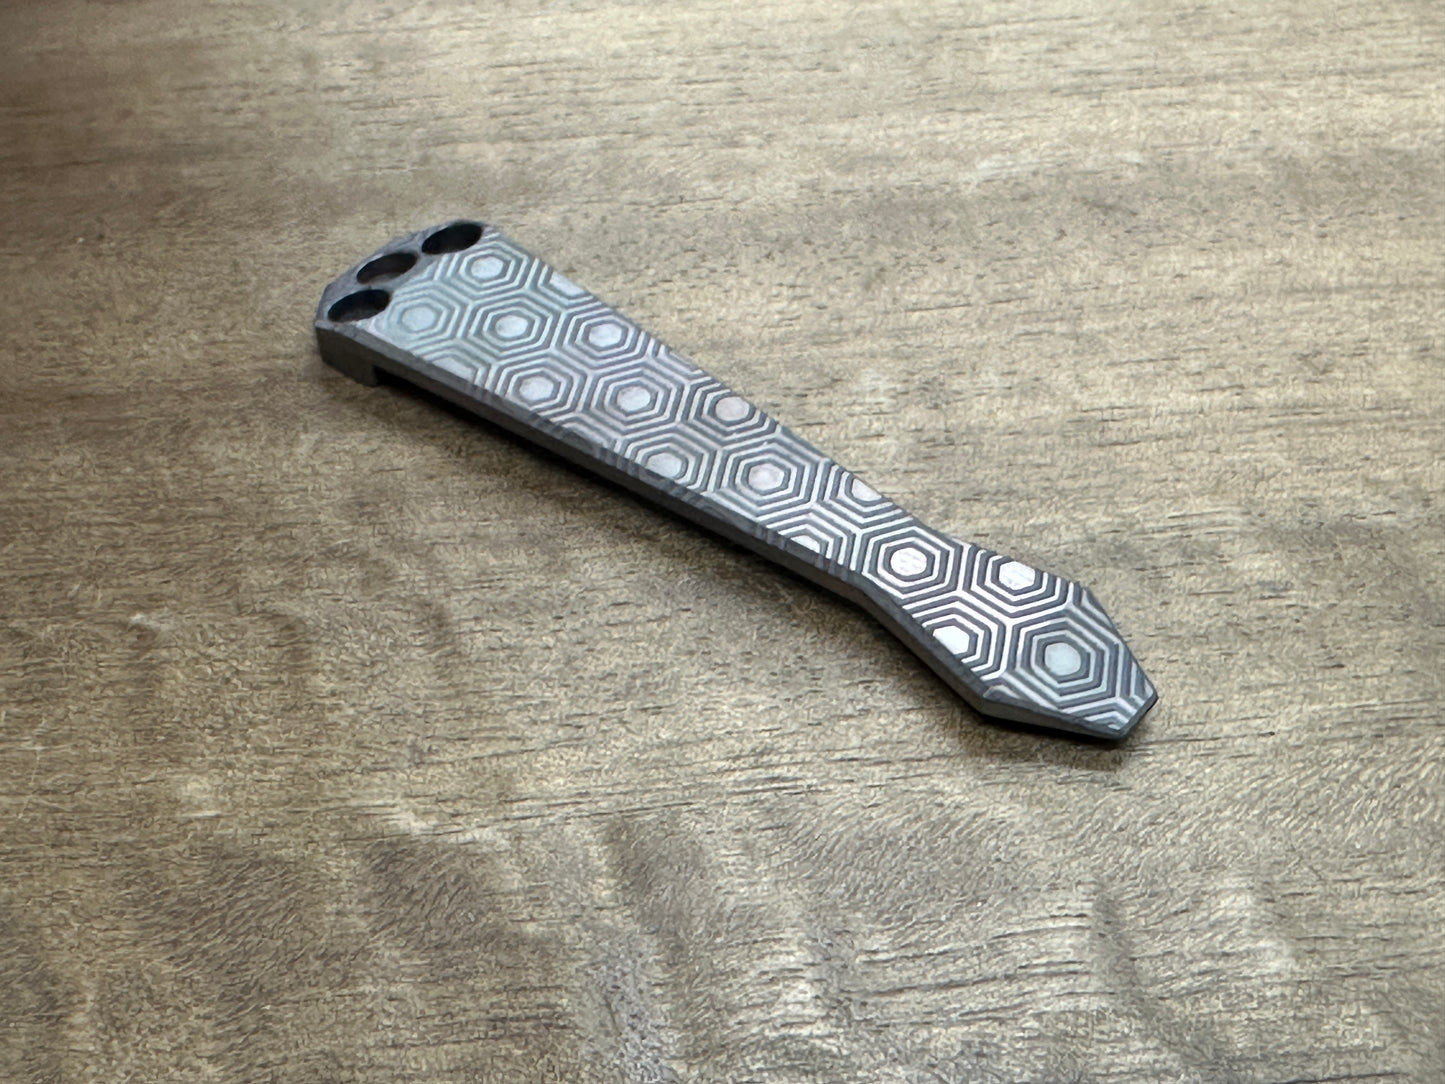 Dark HONEYCOMB engraved Dmd Titanium CLIP for most Benchmade models